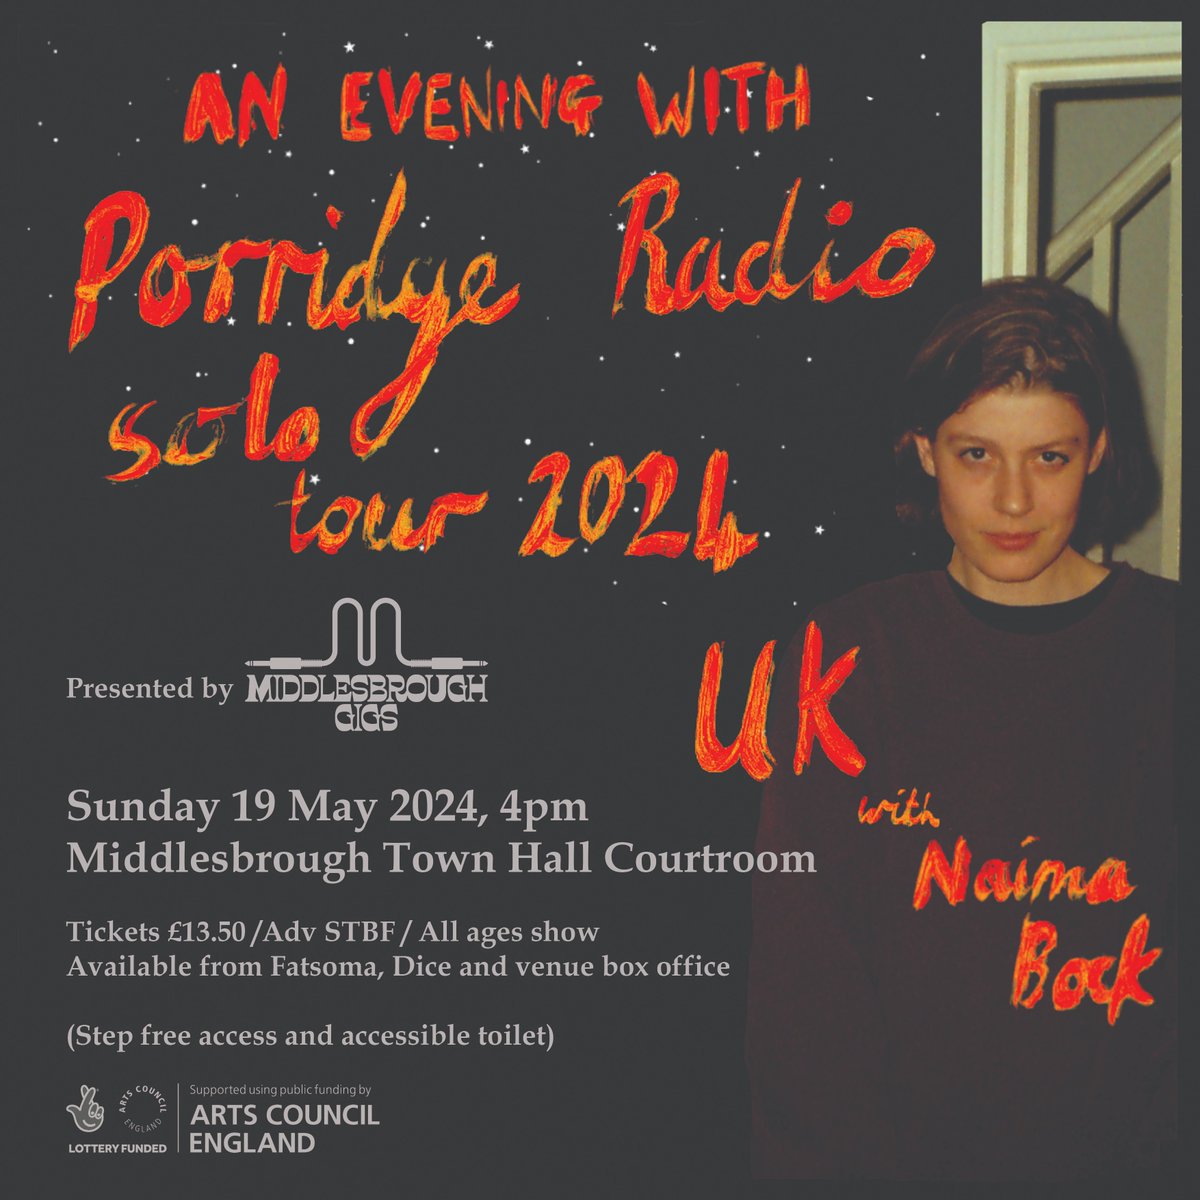 Next up we welcome @porridgeradio + @naimabock to @mbro_townhall Courtroom for a Sunday Social show om 19th May. Tickets are available from our website here: middlesbroughgigs.com